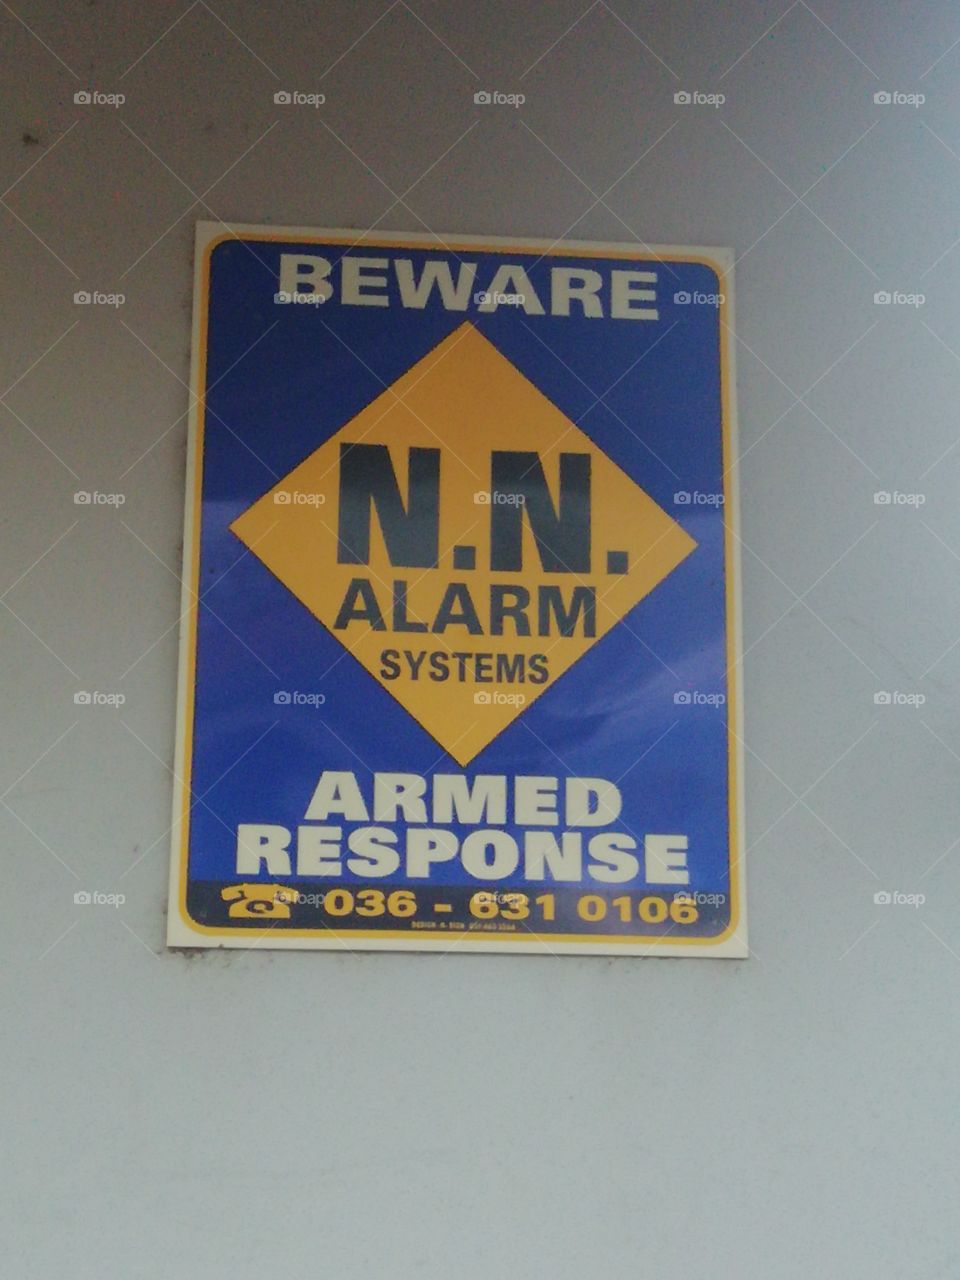 Armed Response Poster